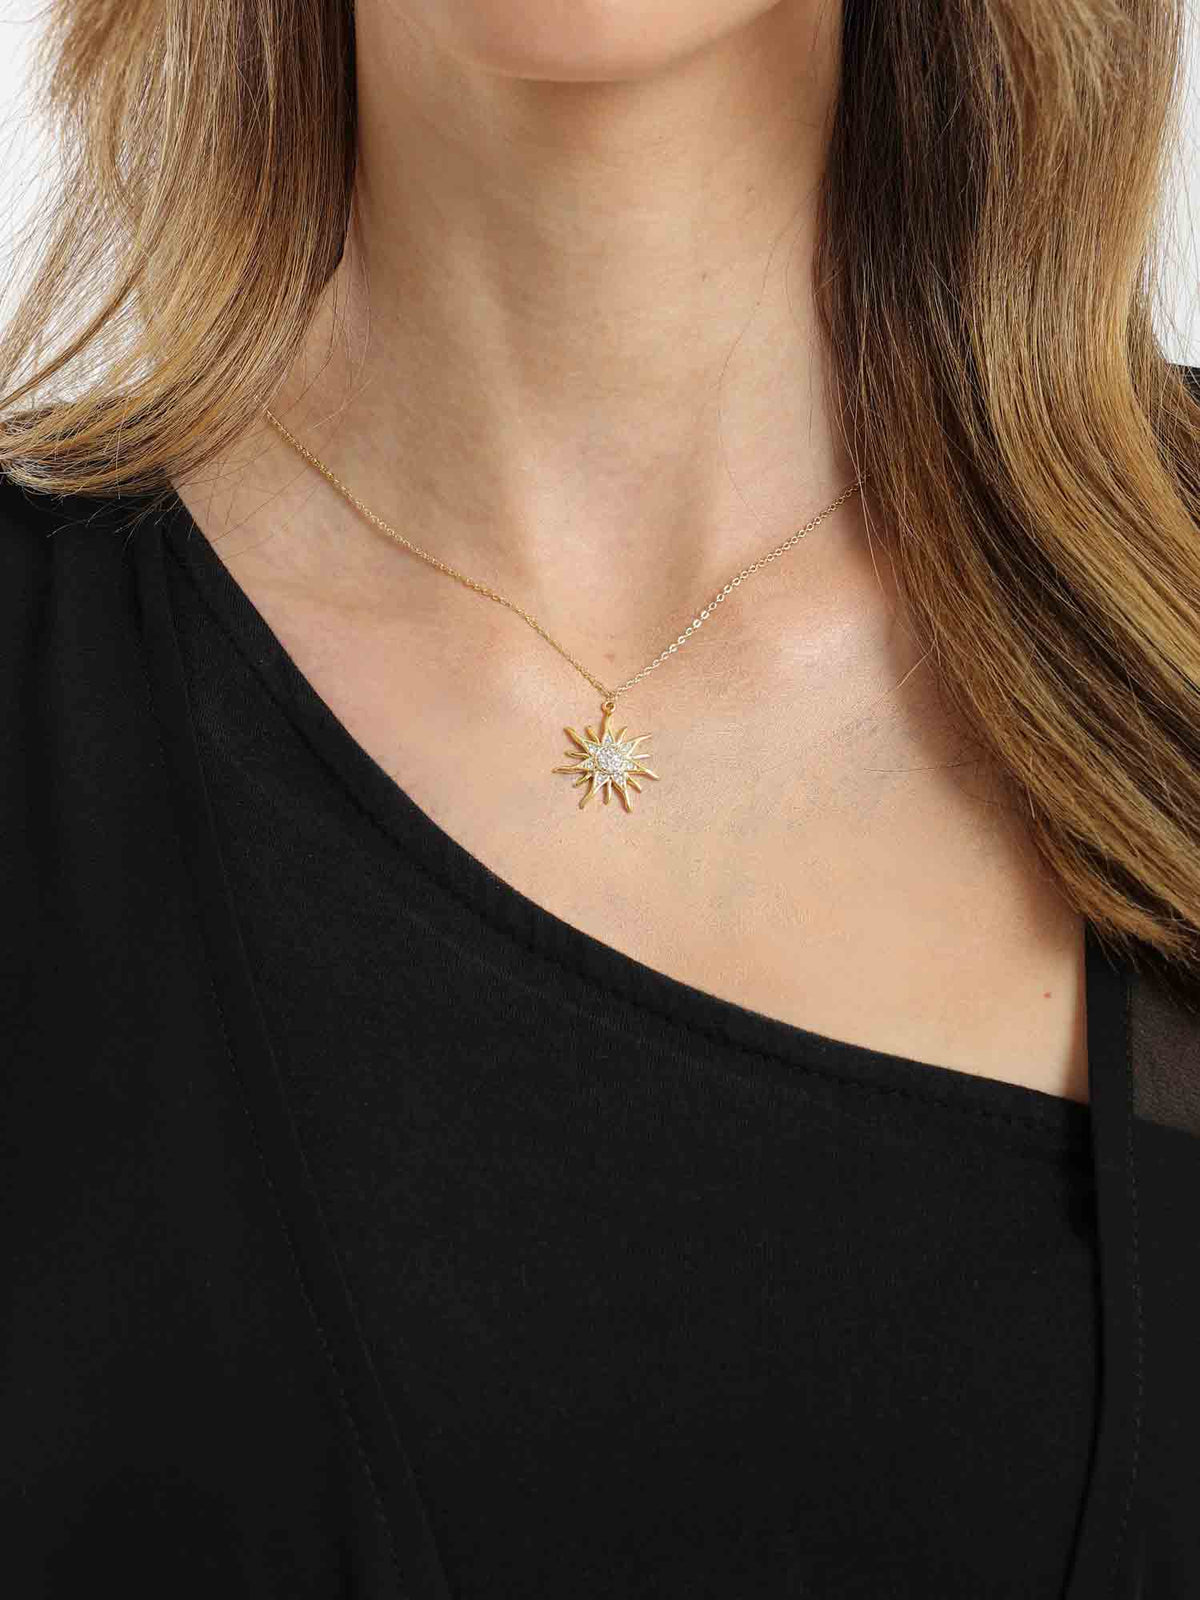 Sea star Gold-Tone Stainless Steel Chain Necklace